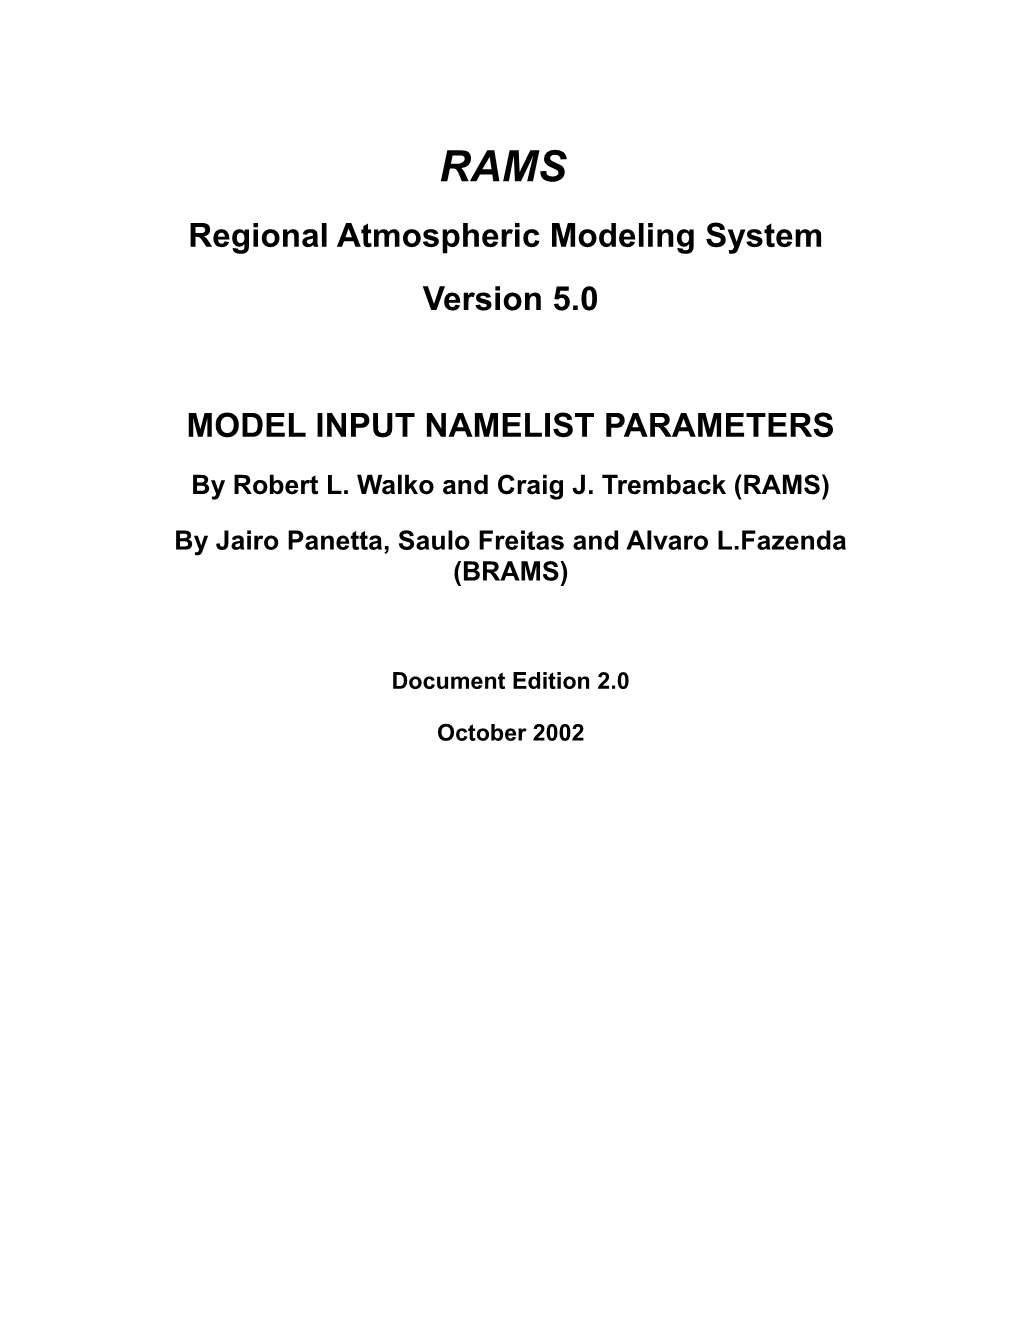 Chapter 7 - the Rams Atmospheric Model